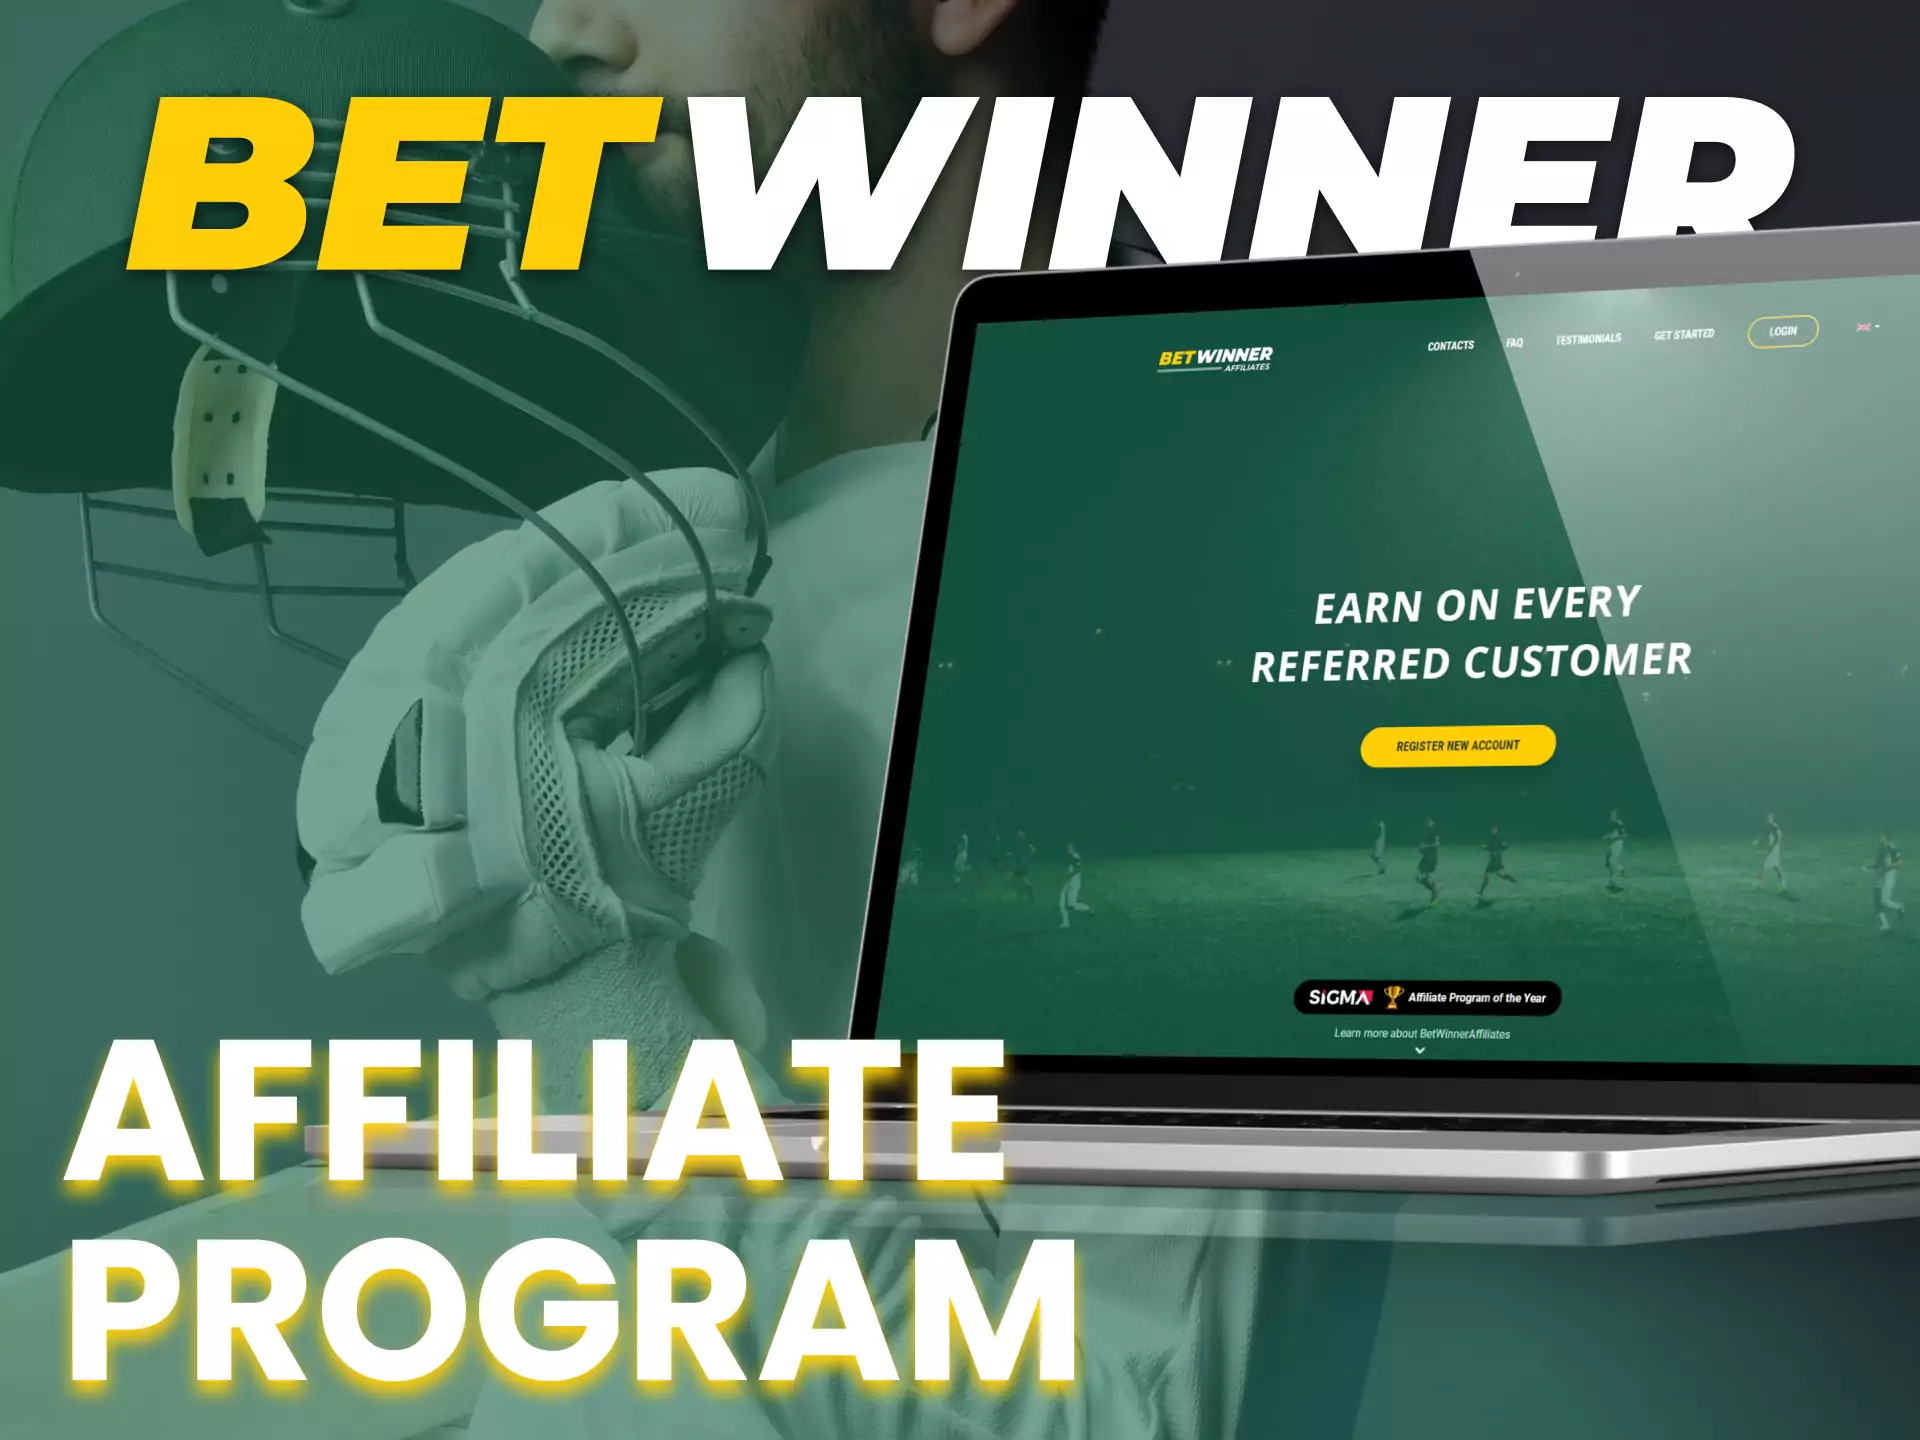 Join the Betwinner affiliate program and get bonuses for inviting new users.